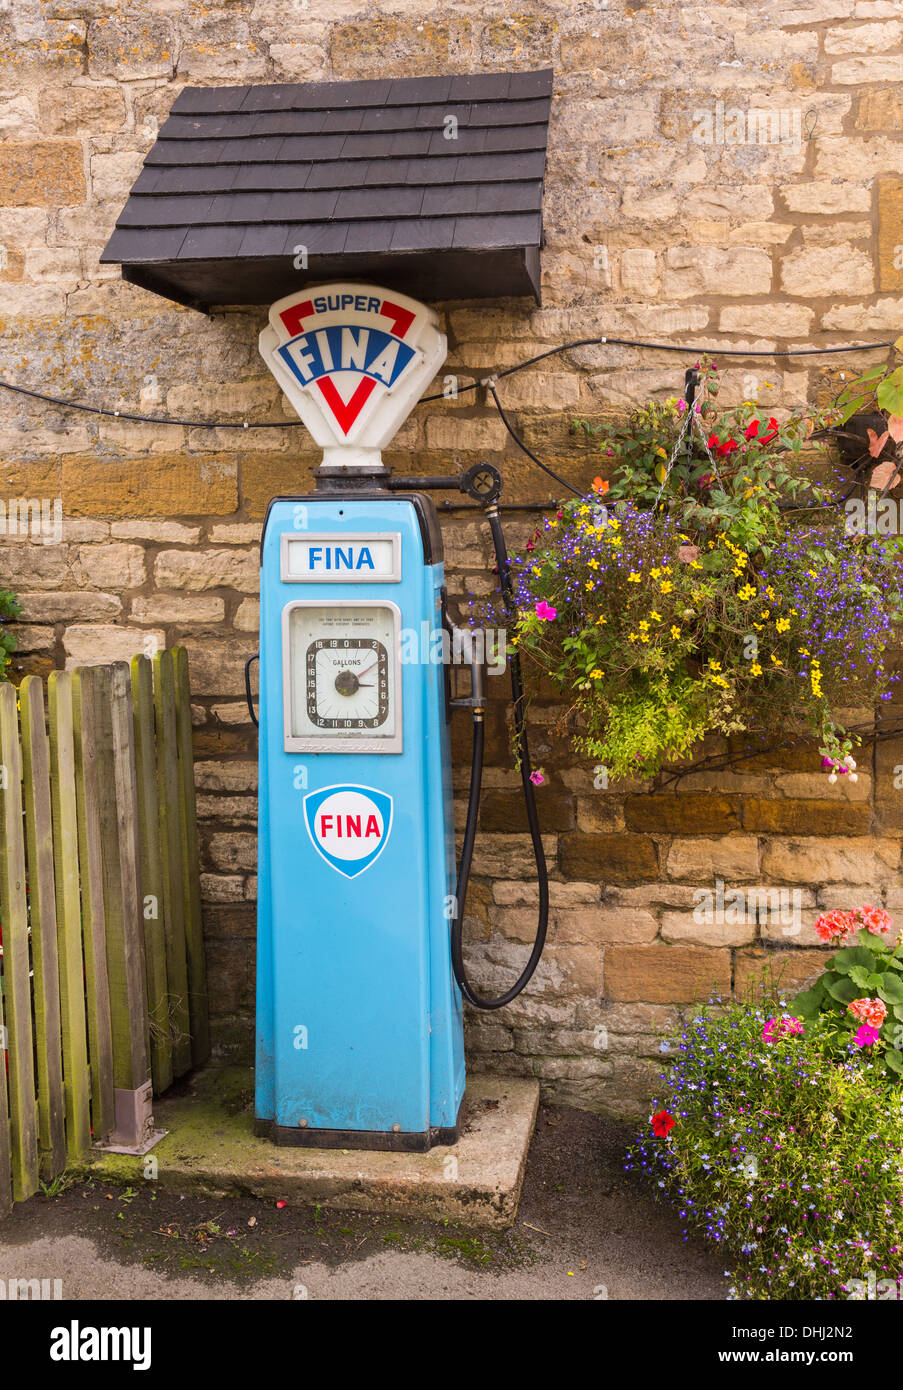 Fina Petrol pump from the 1950s at Plough Inn near Stanway in the Cotswolds, UK Stock Photo